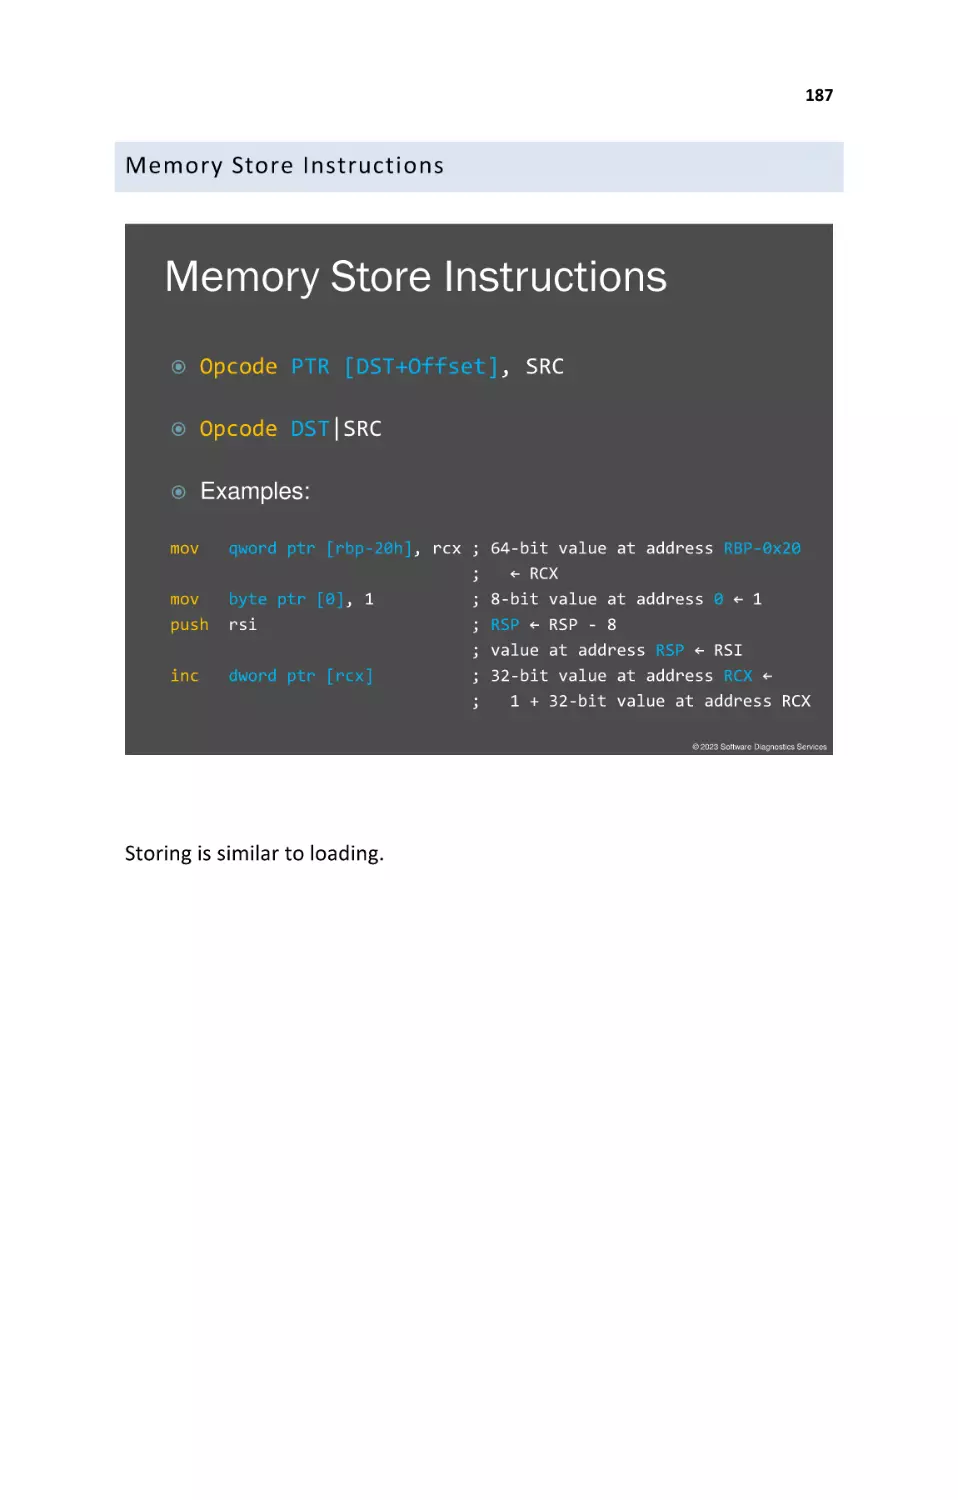 Memory Store Instructions